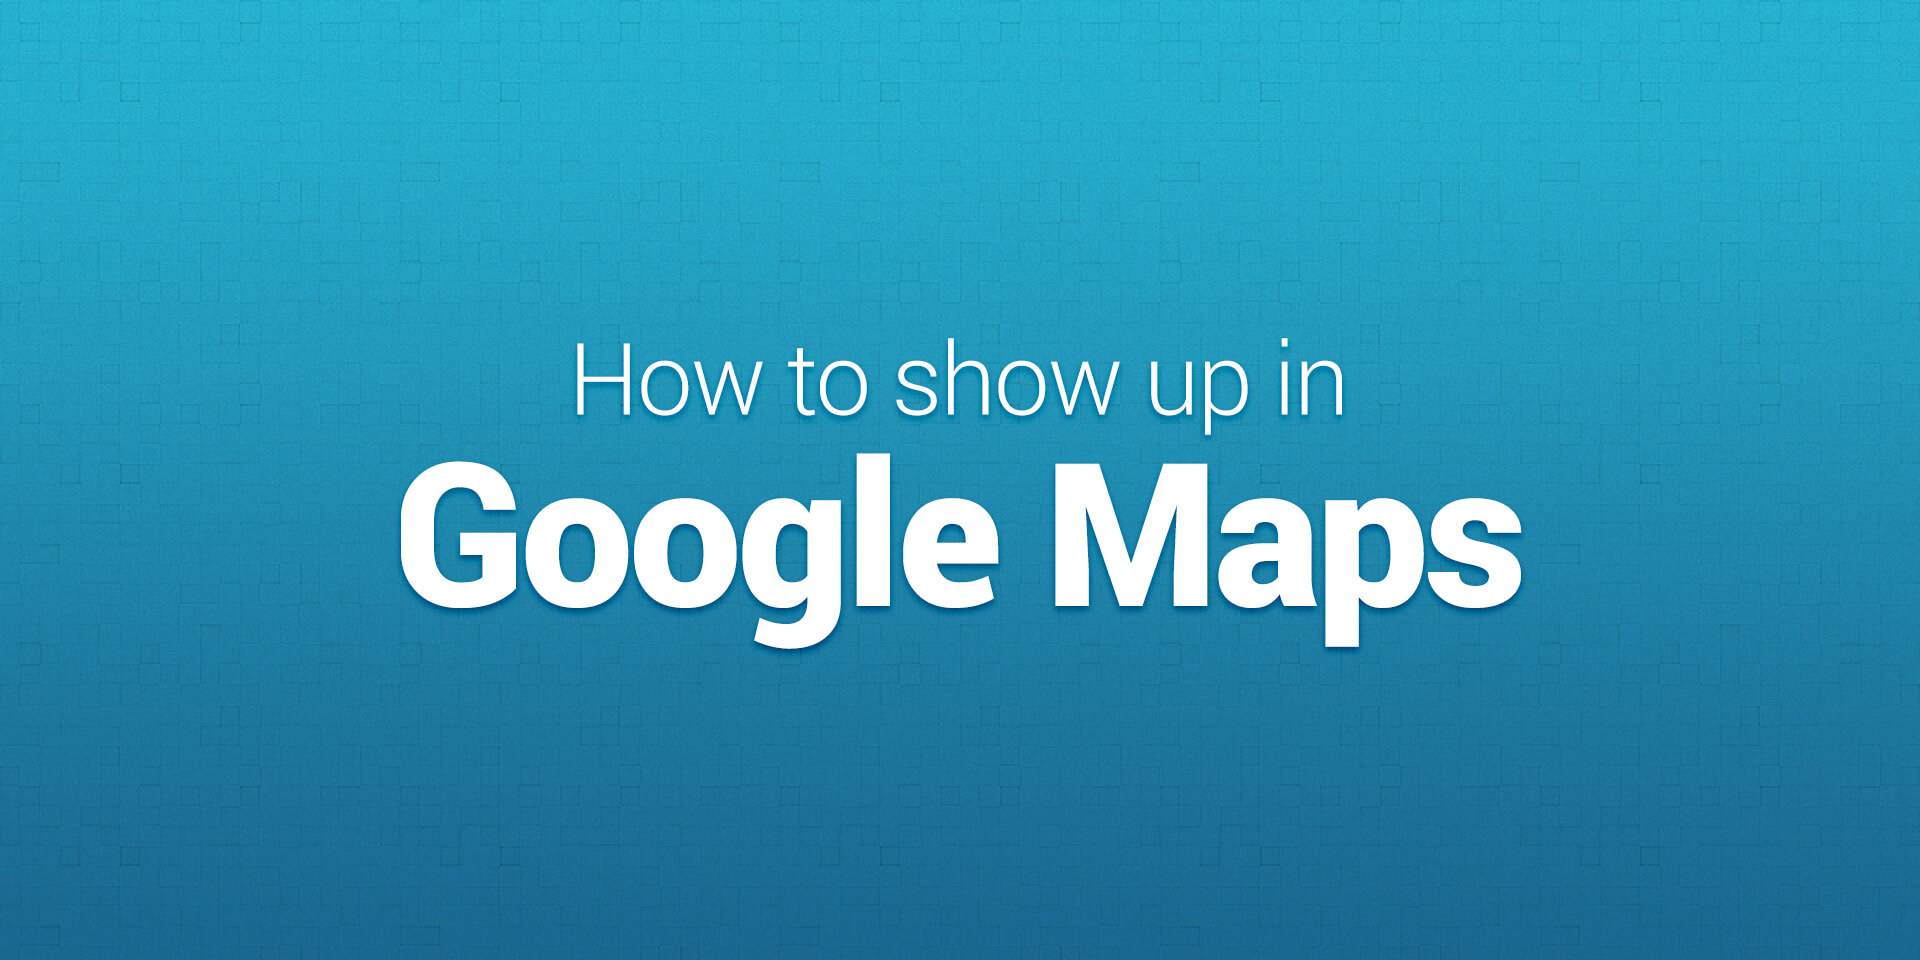 How to show up in Google Maps